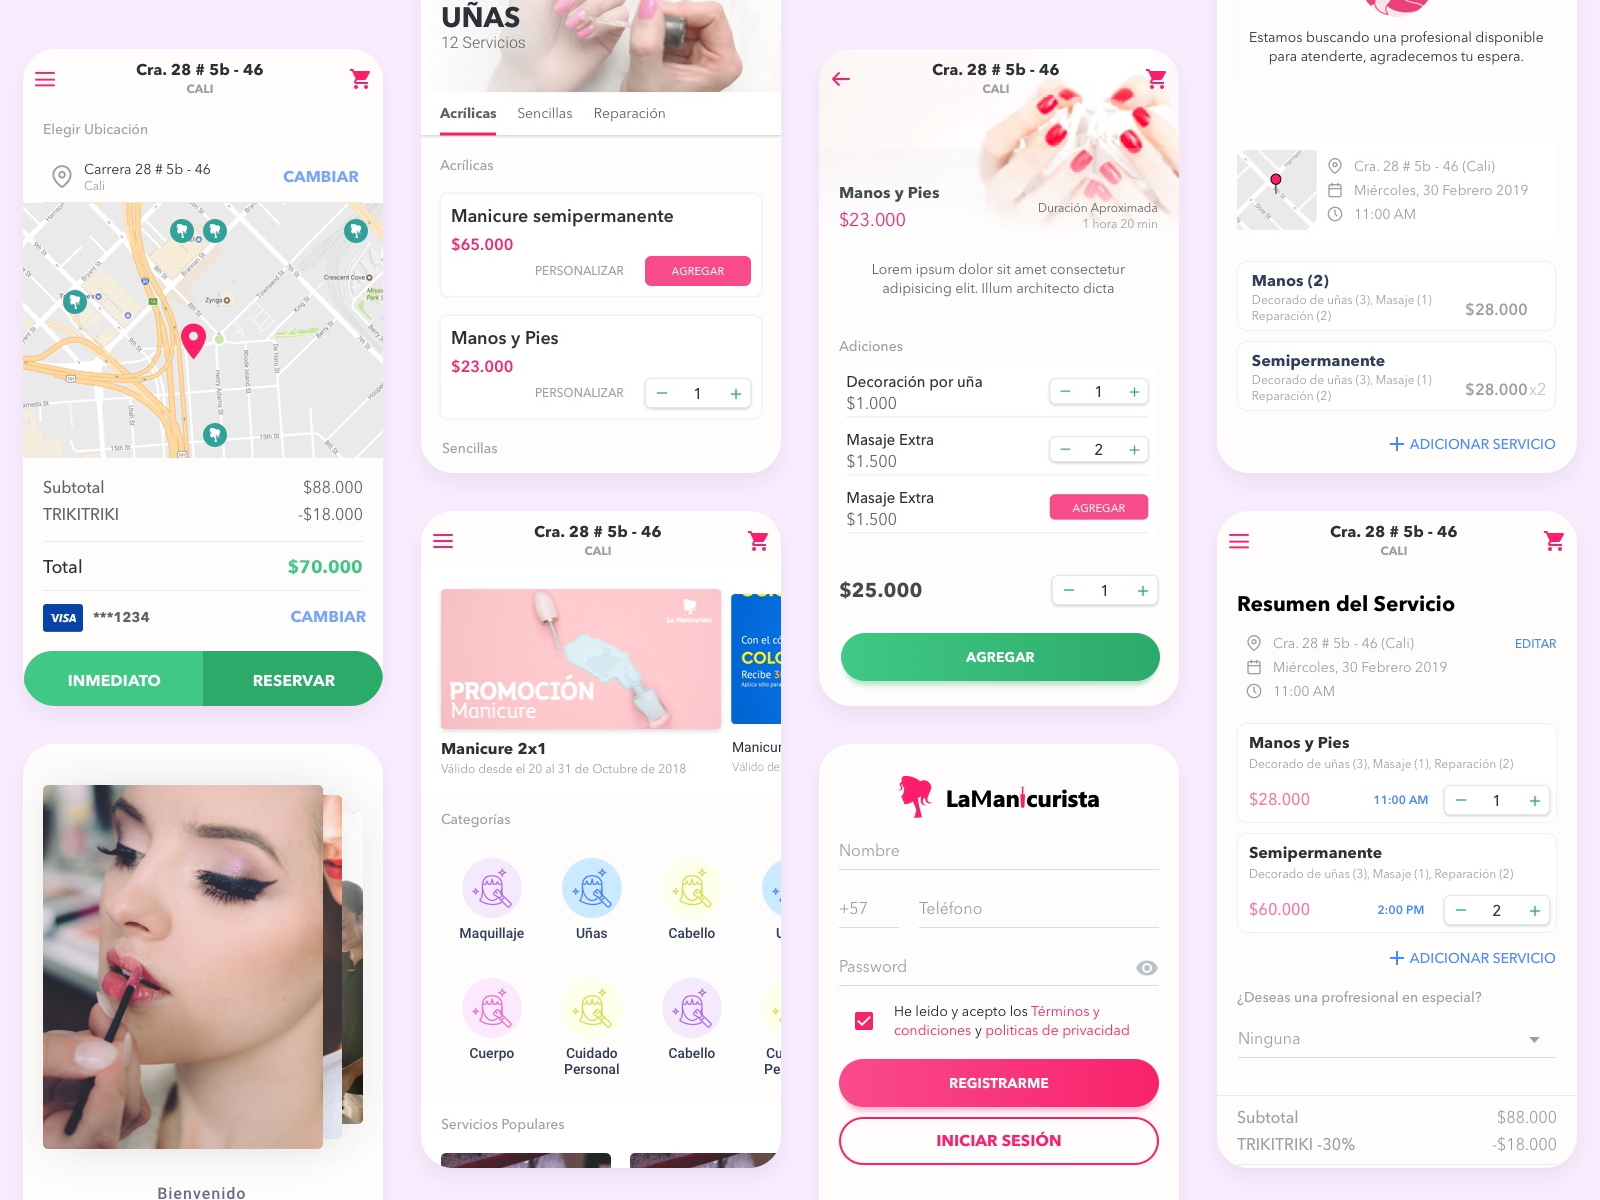 New look and field for La Manicurista App